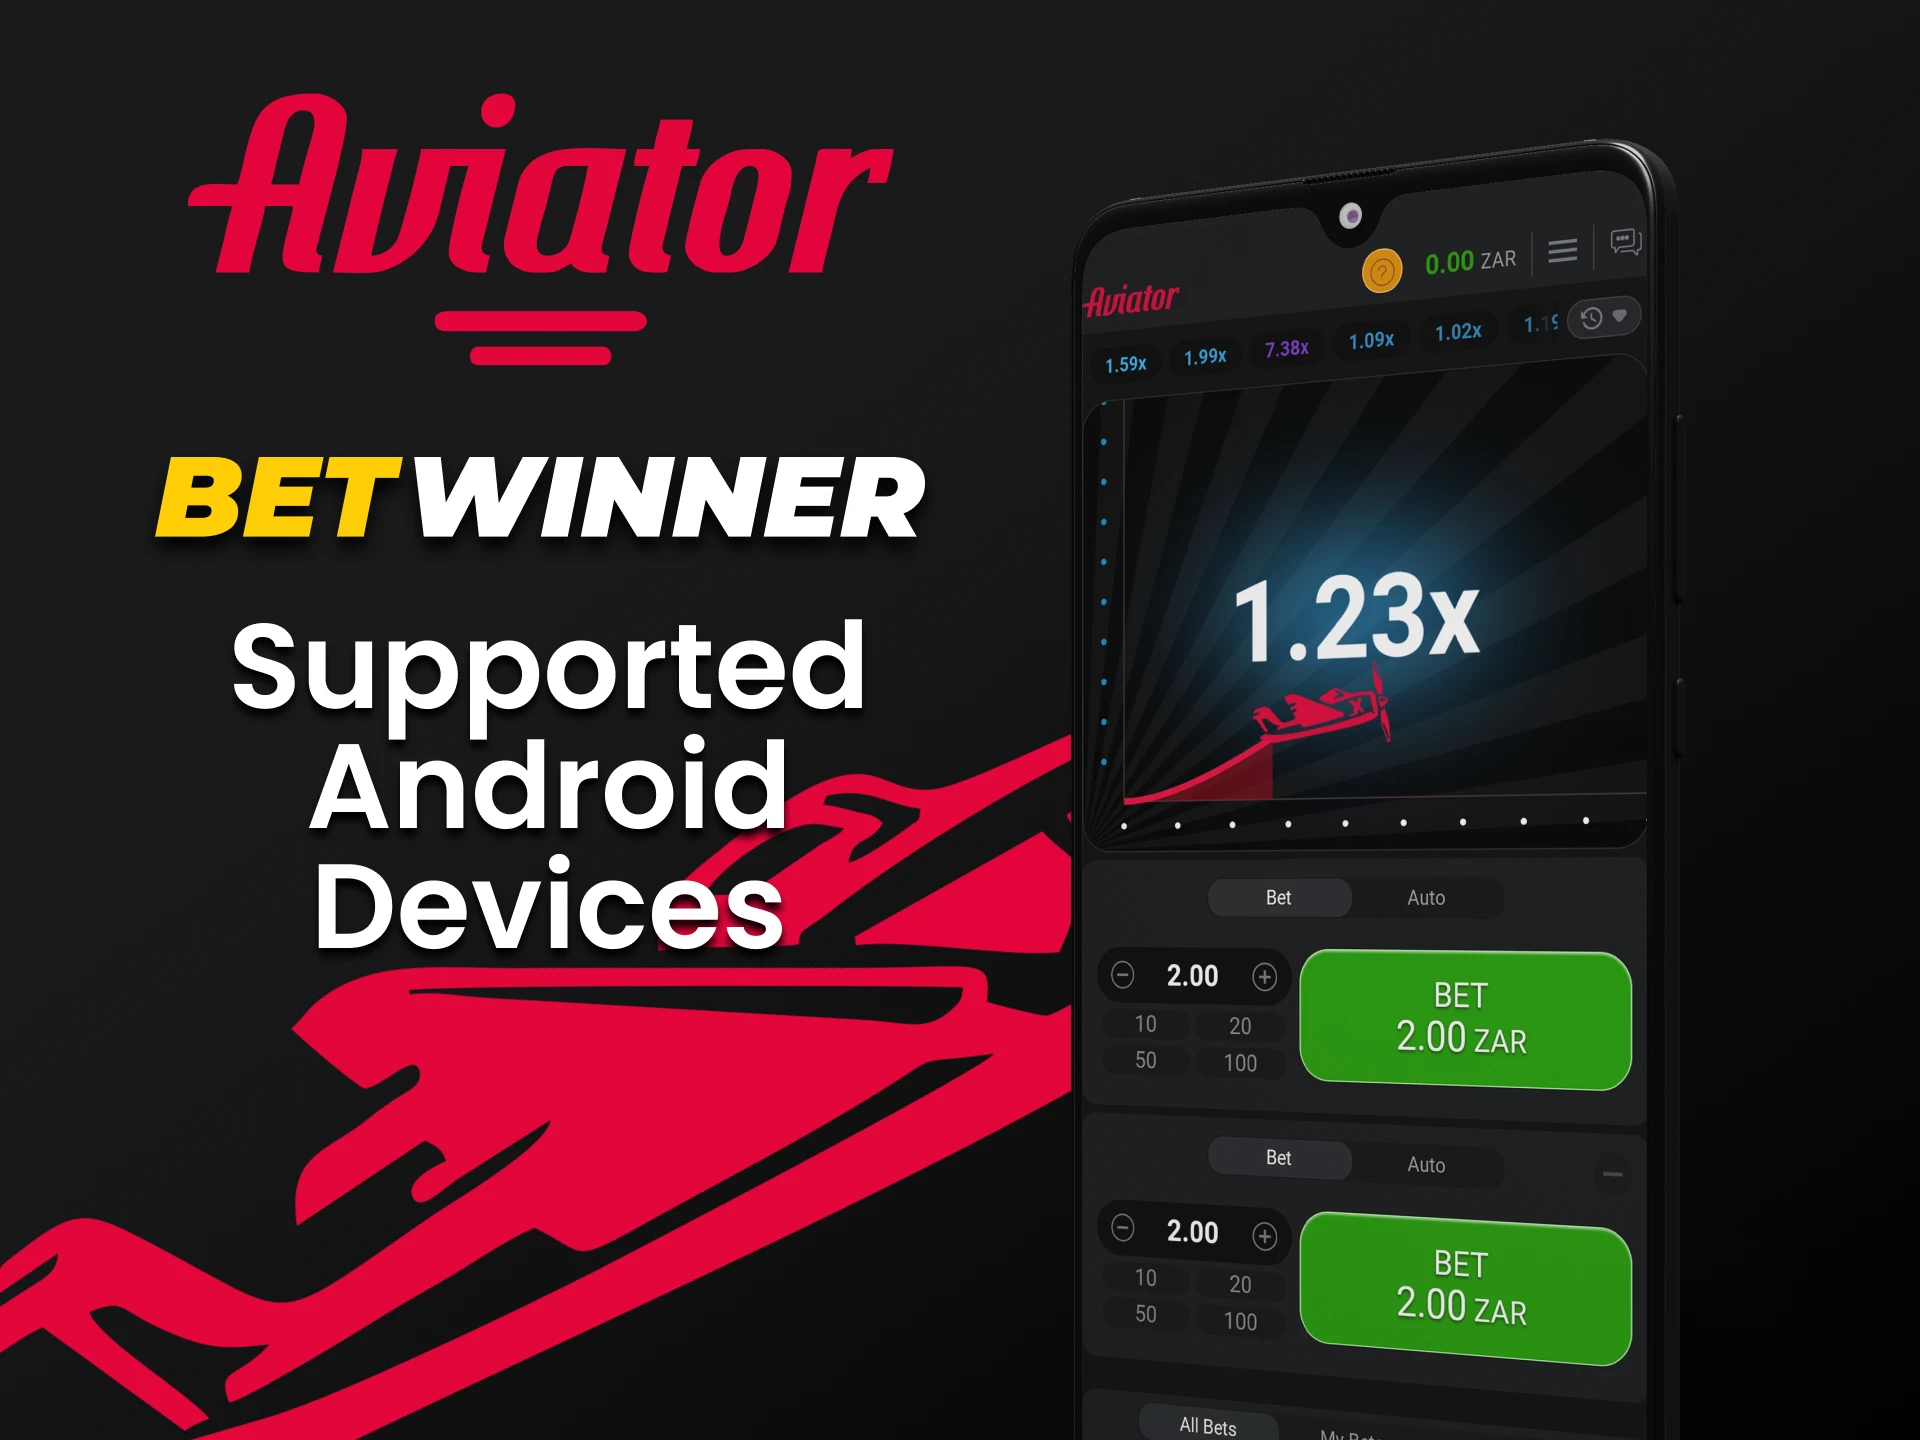 Play Aviator through the Betwinner app for Android.